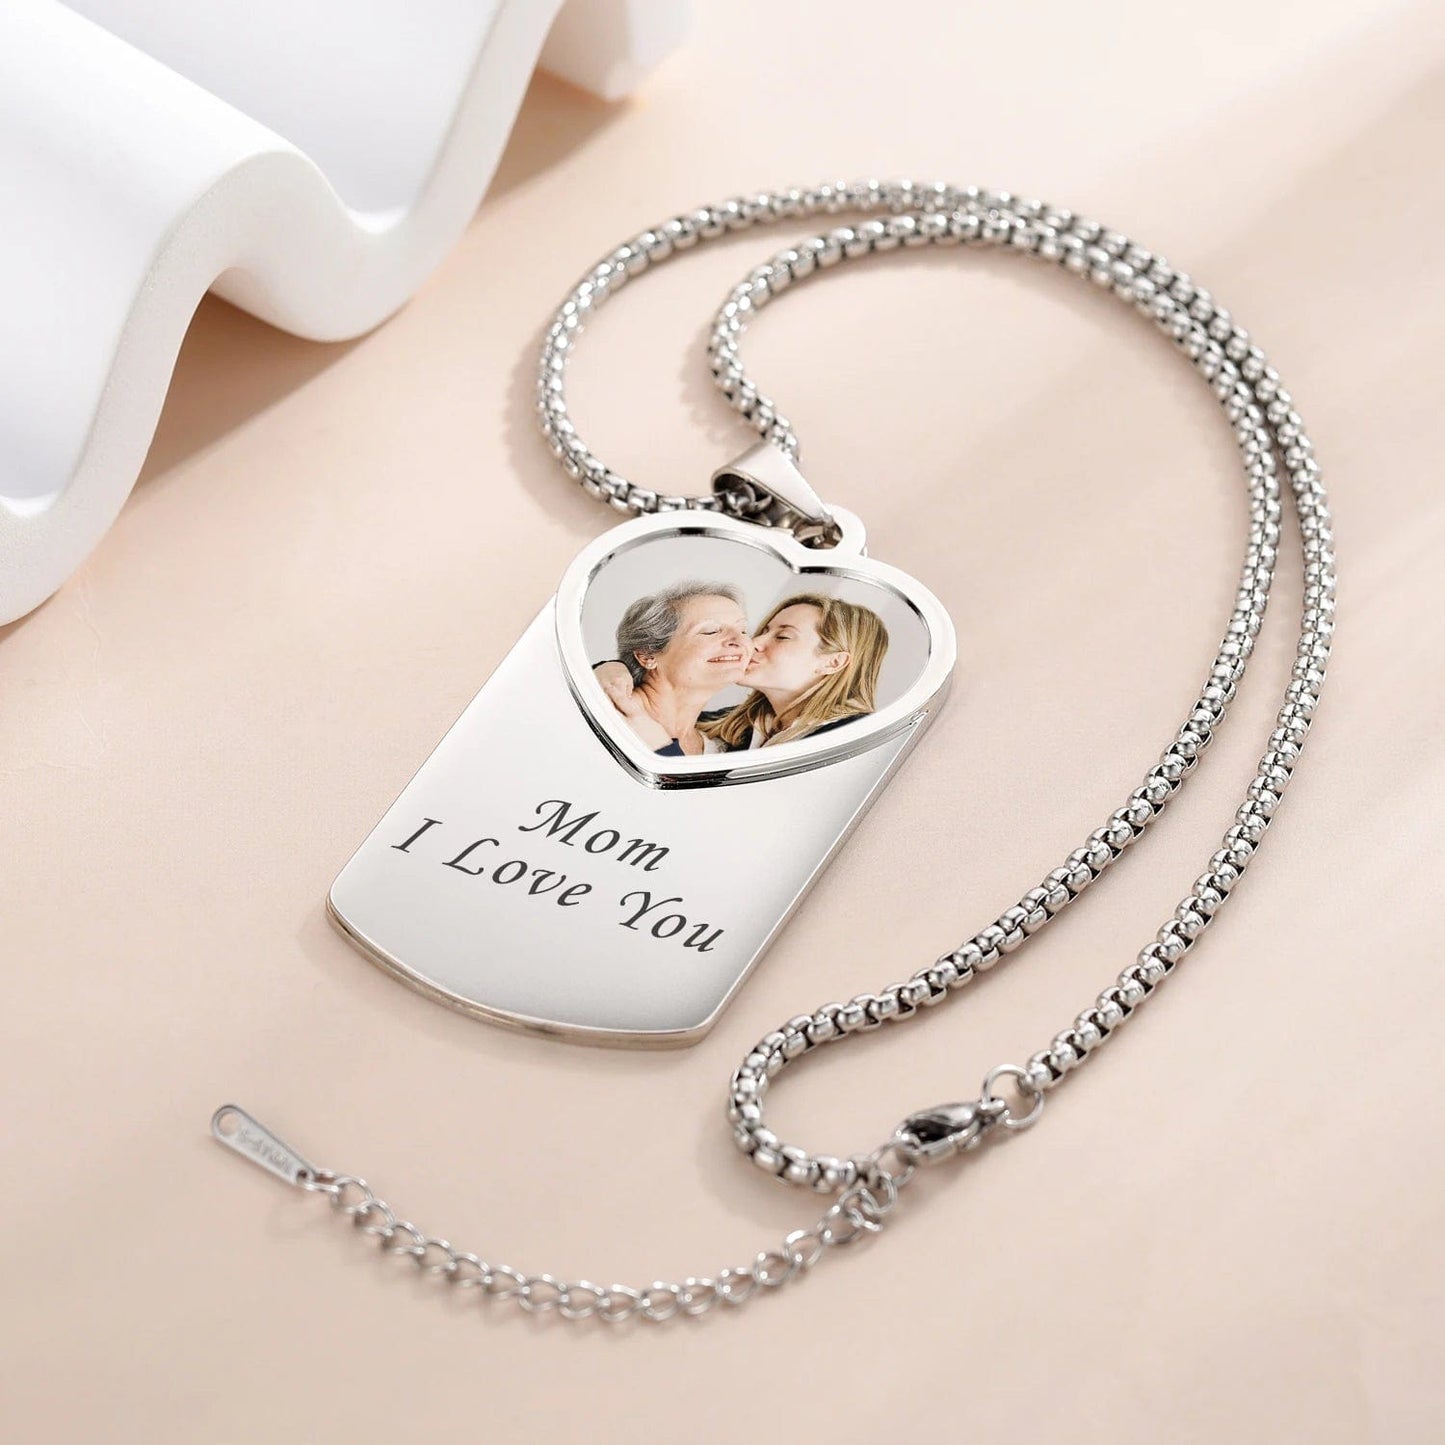 Engraved Dog Tag Necklace With Heart Photo